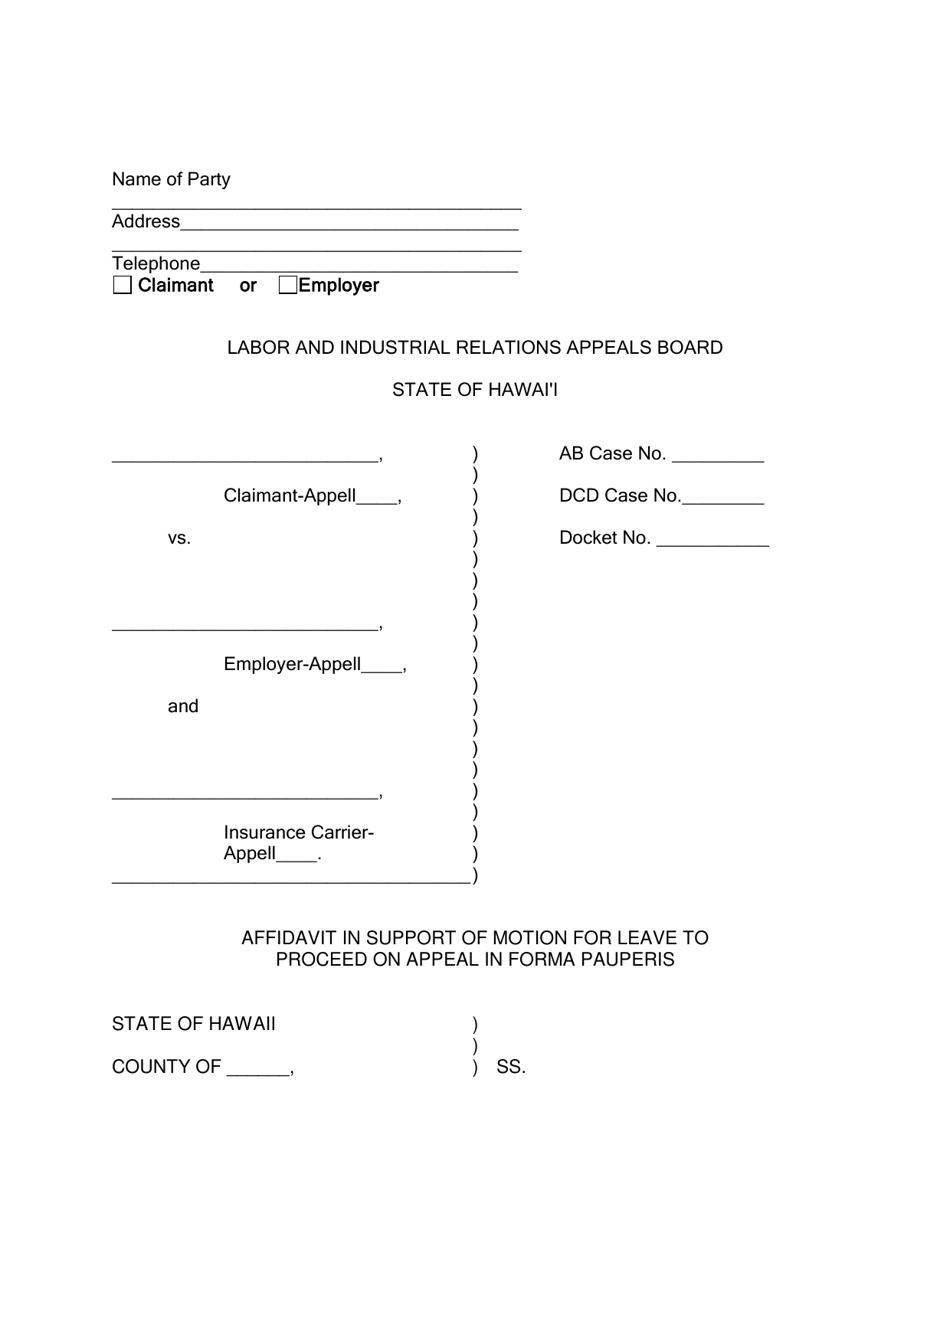 Affidavit in Support of Motion for Leave to Proceed on Appeal in Forma Pauperis - Hawaii, Page 1